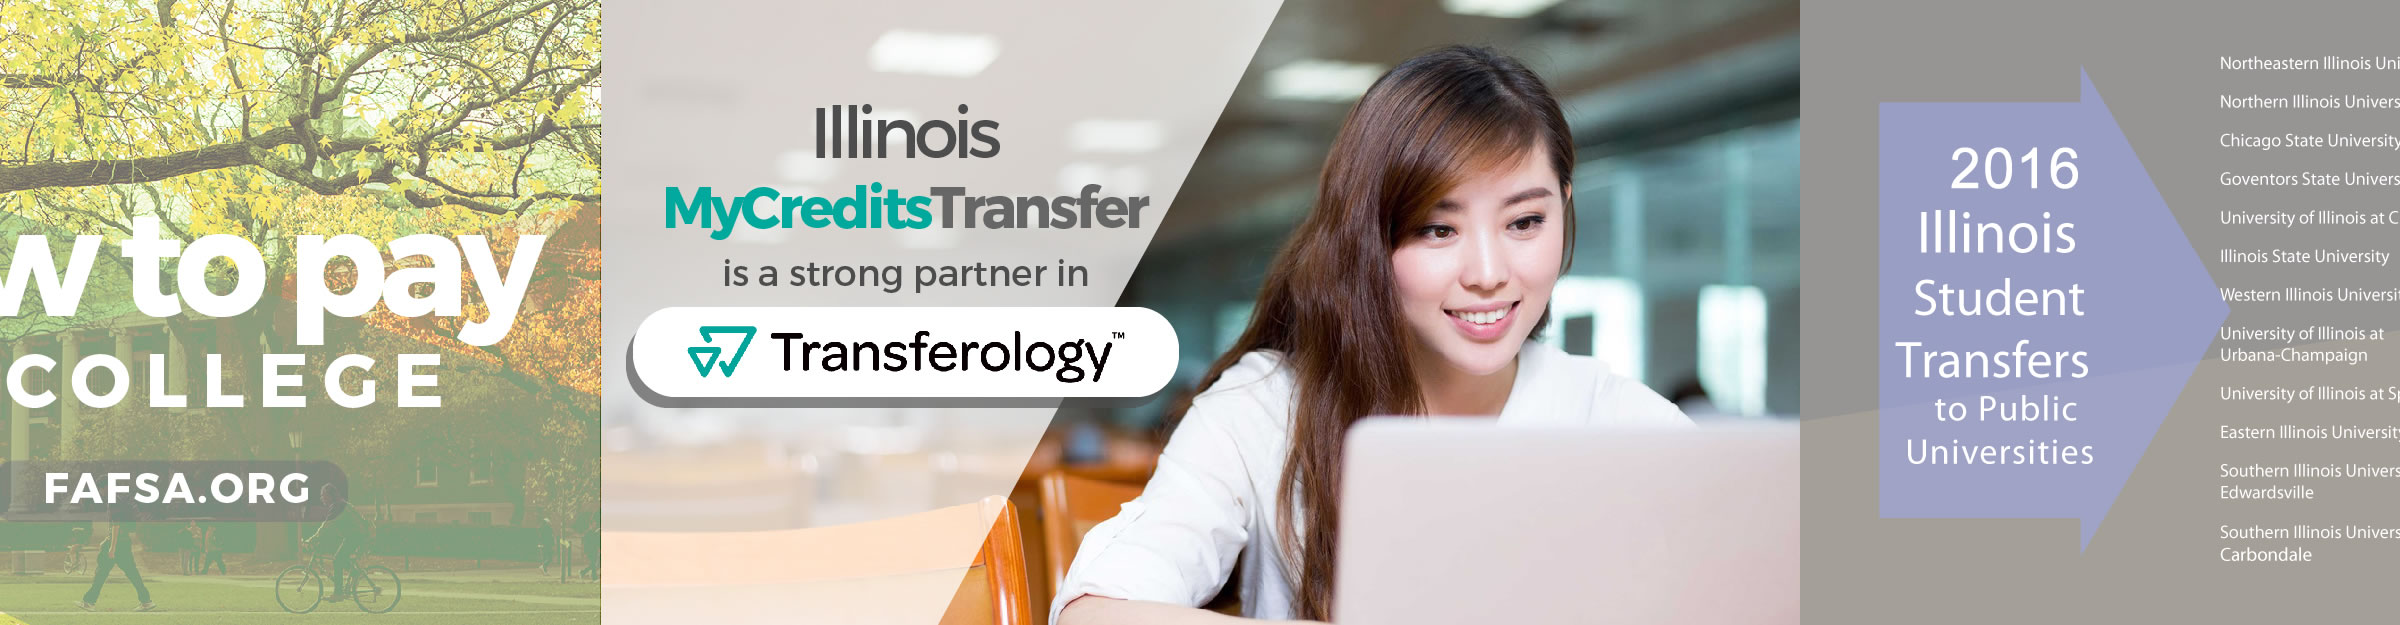 Illinois MyCreditsTransfer is a strong partner in Transferology